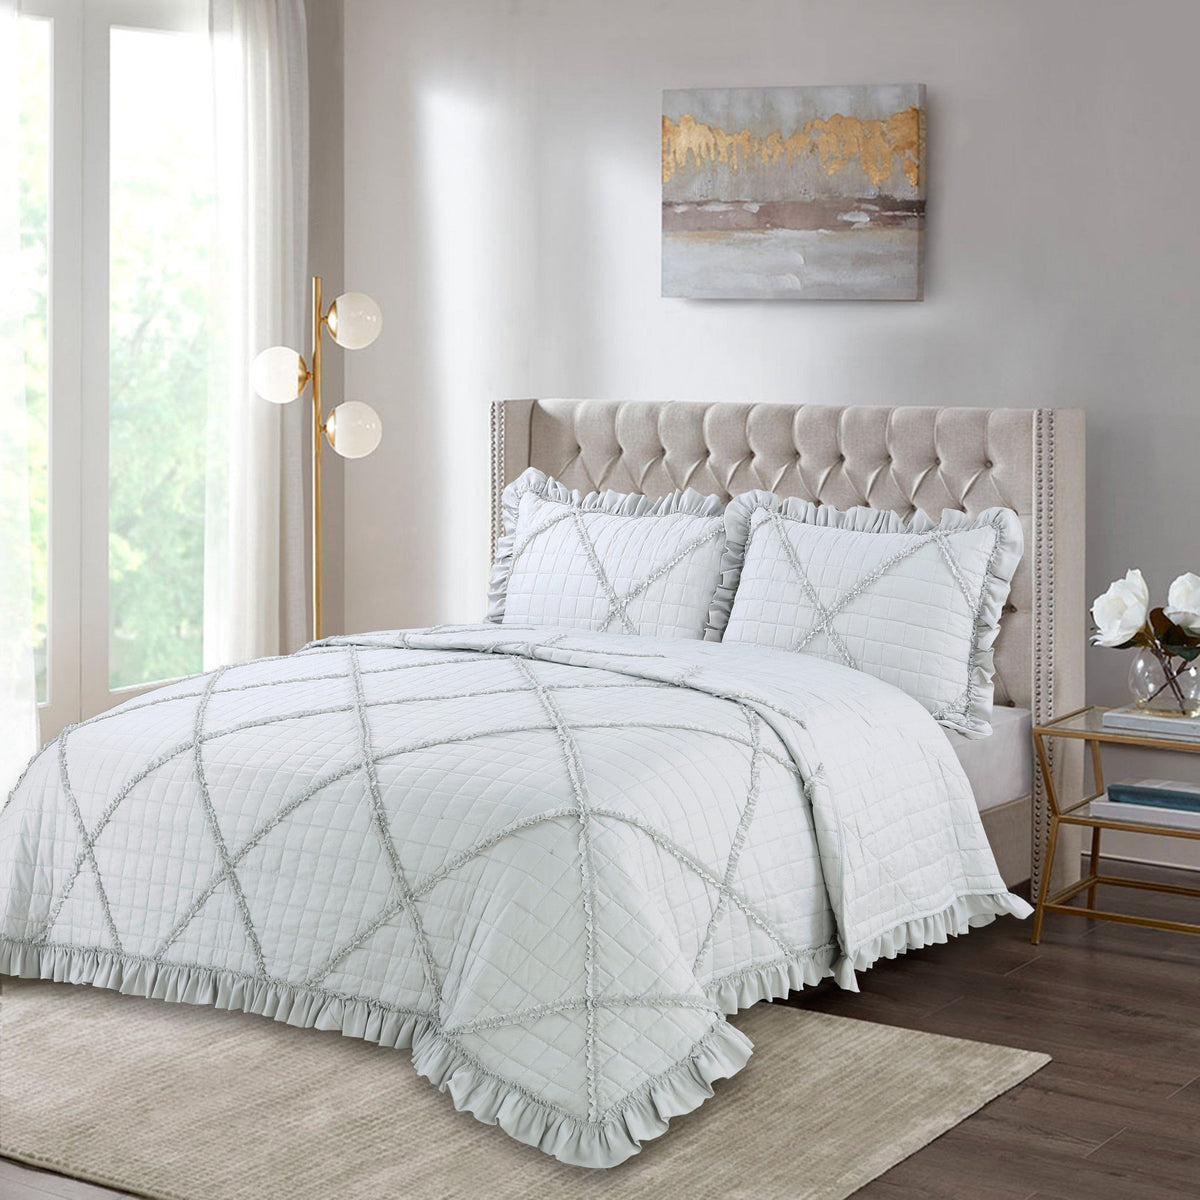 Lush Ruffled Textured Shabby Chic Embroidered Stitching Coverlet Bedspread Ultra Soft Solid 3 Piece Summer Quilt Set, Light Grey